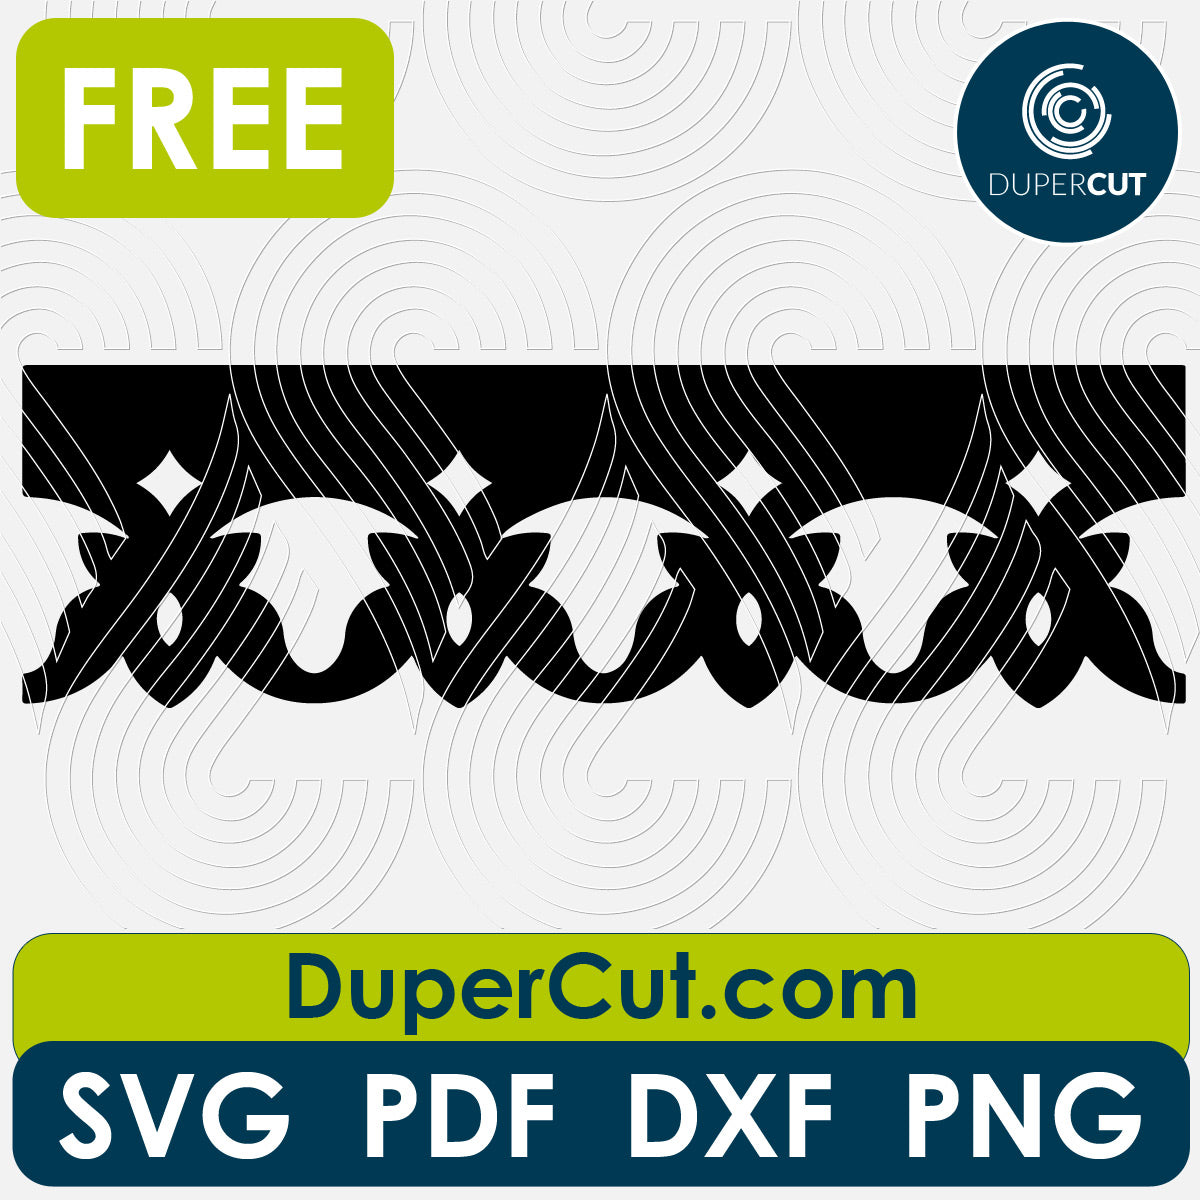 Border pattern vintage, FREE cutting template SVG PNG DXF files for Glowforge, Cricut, Silhouette, CNC laser router by DuperCut.com